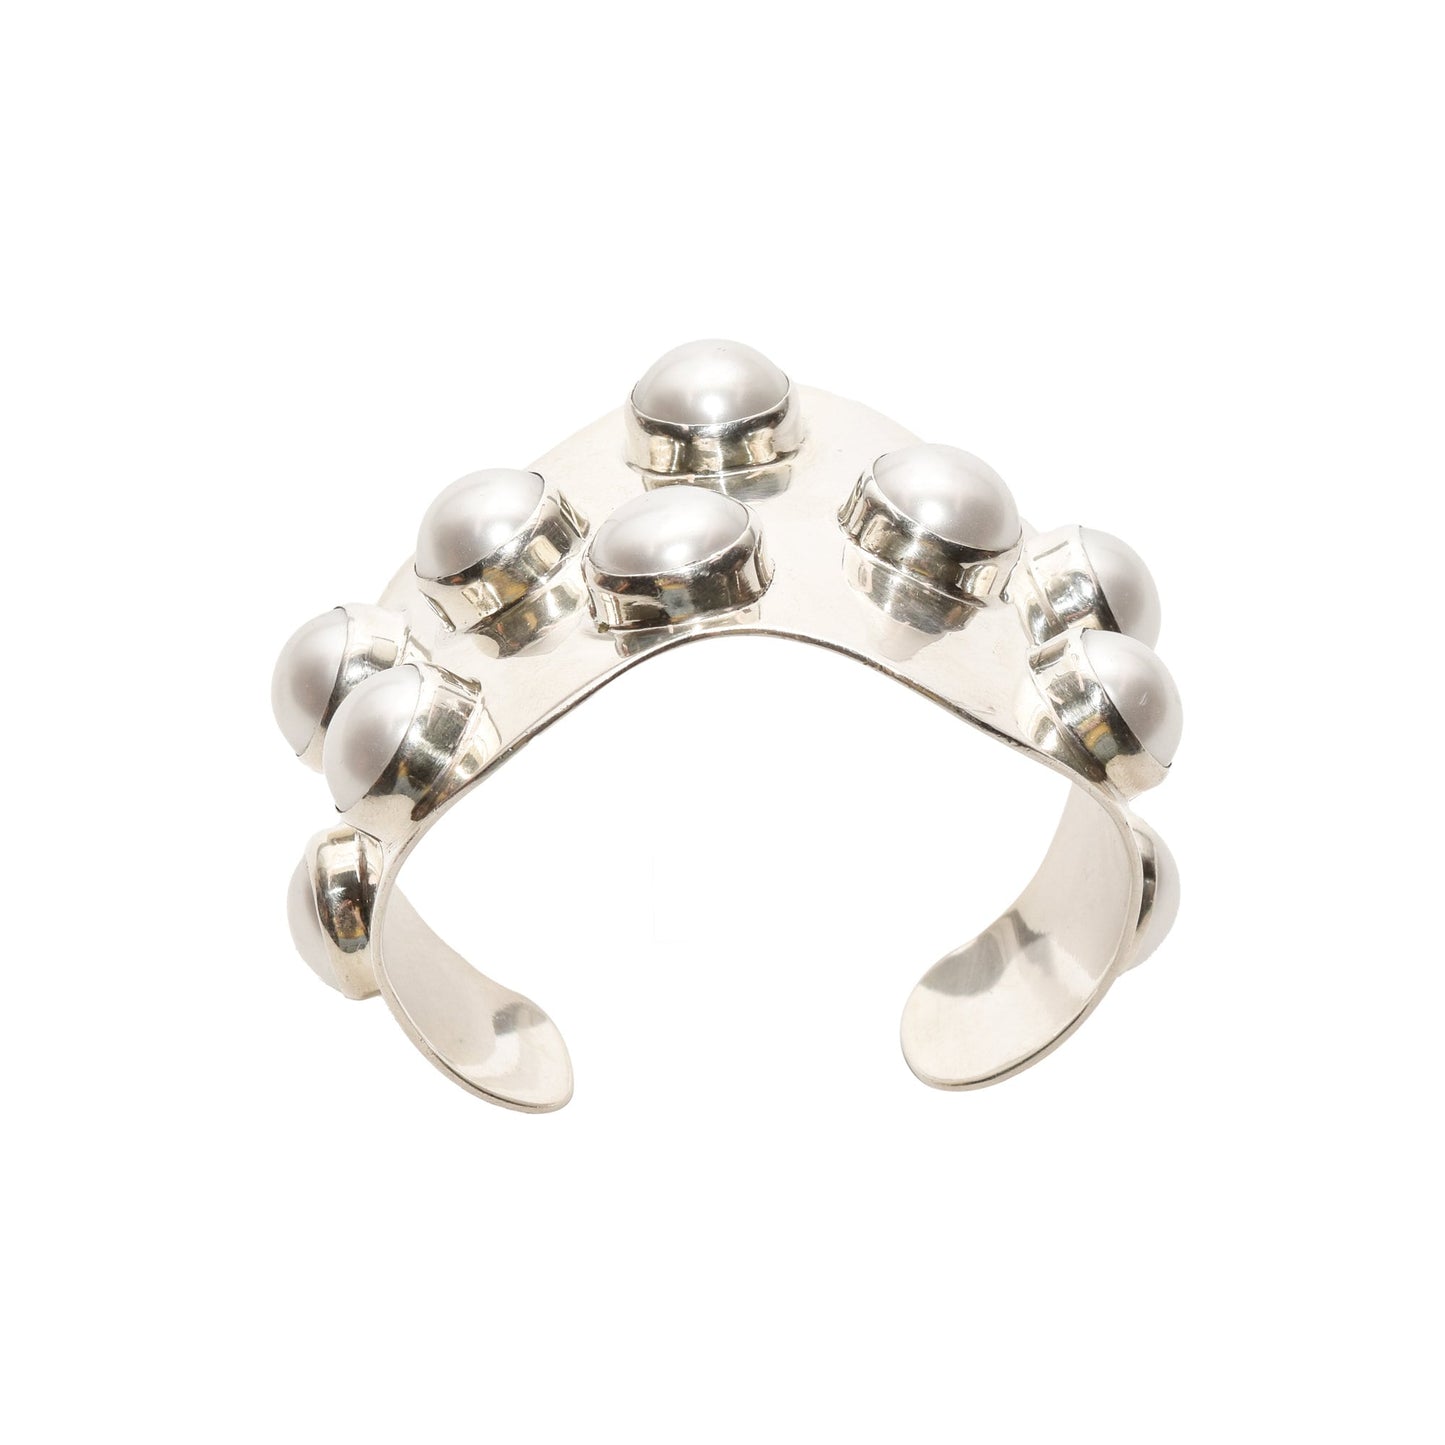 TAXCO modernist sterling silver mabe pearl cuff bracelet with a wide wavy design, statement jewelry piece measuring 5.75 inches, isolated on white background.